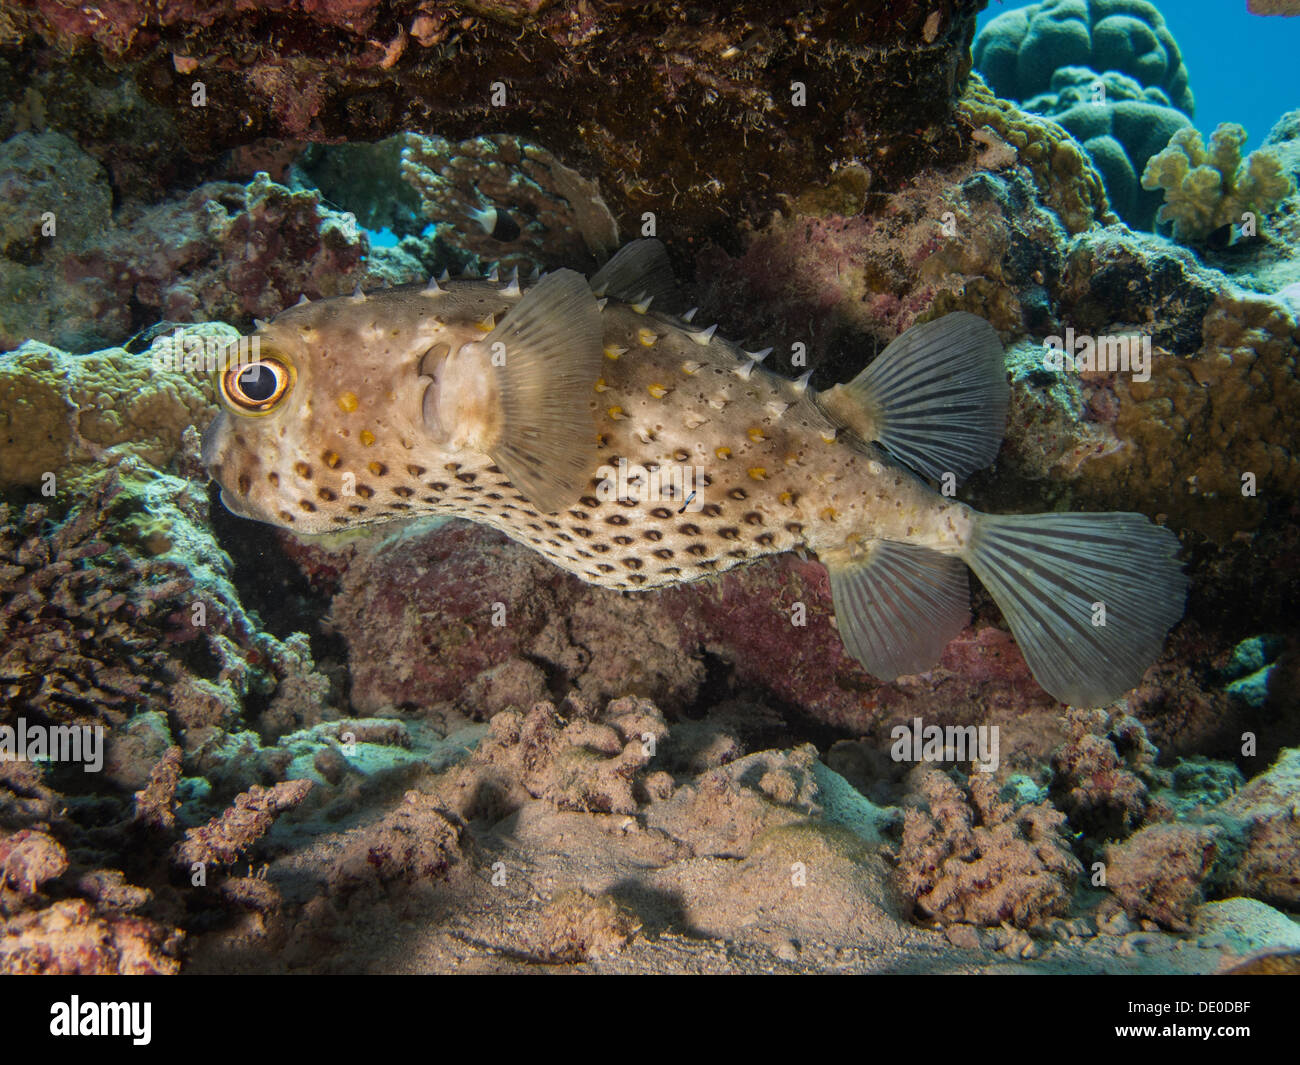 Yellow-spotted Porcupinefish or Yellow-spotted Burrfish (Cyclichthys spilostylus), Mangrove Bay, Red Sea, Egypt, Africa Stock Photo